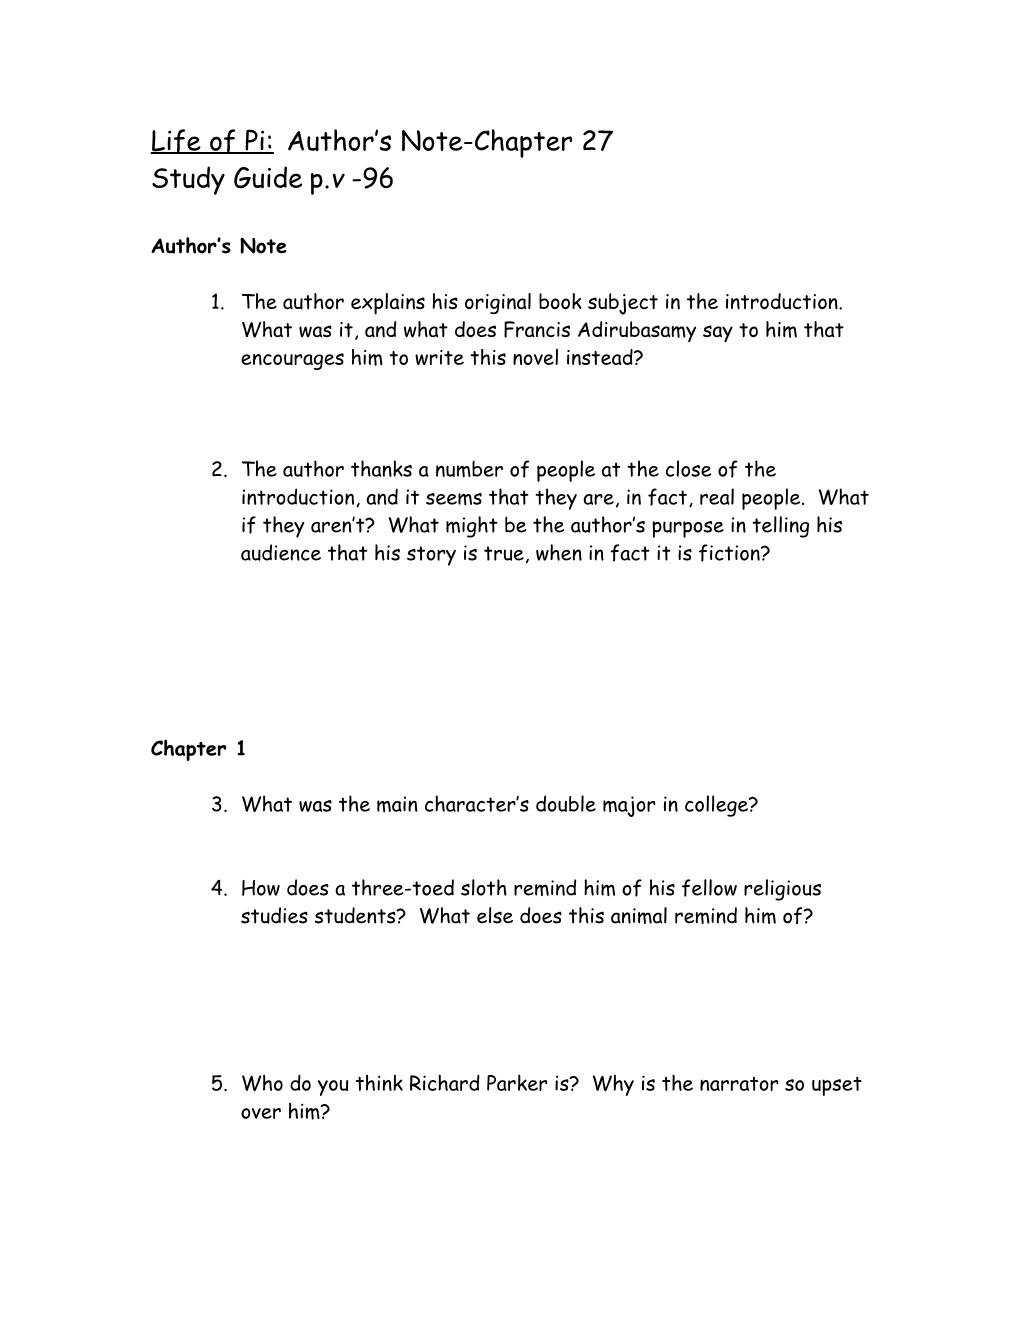 Life of Pi Study Guide Author S Note-Chapter 25